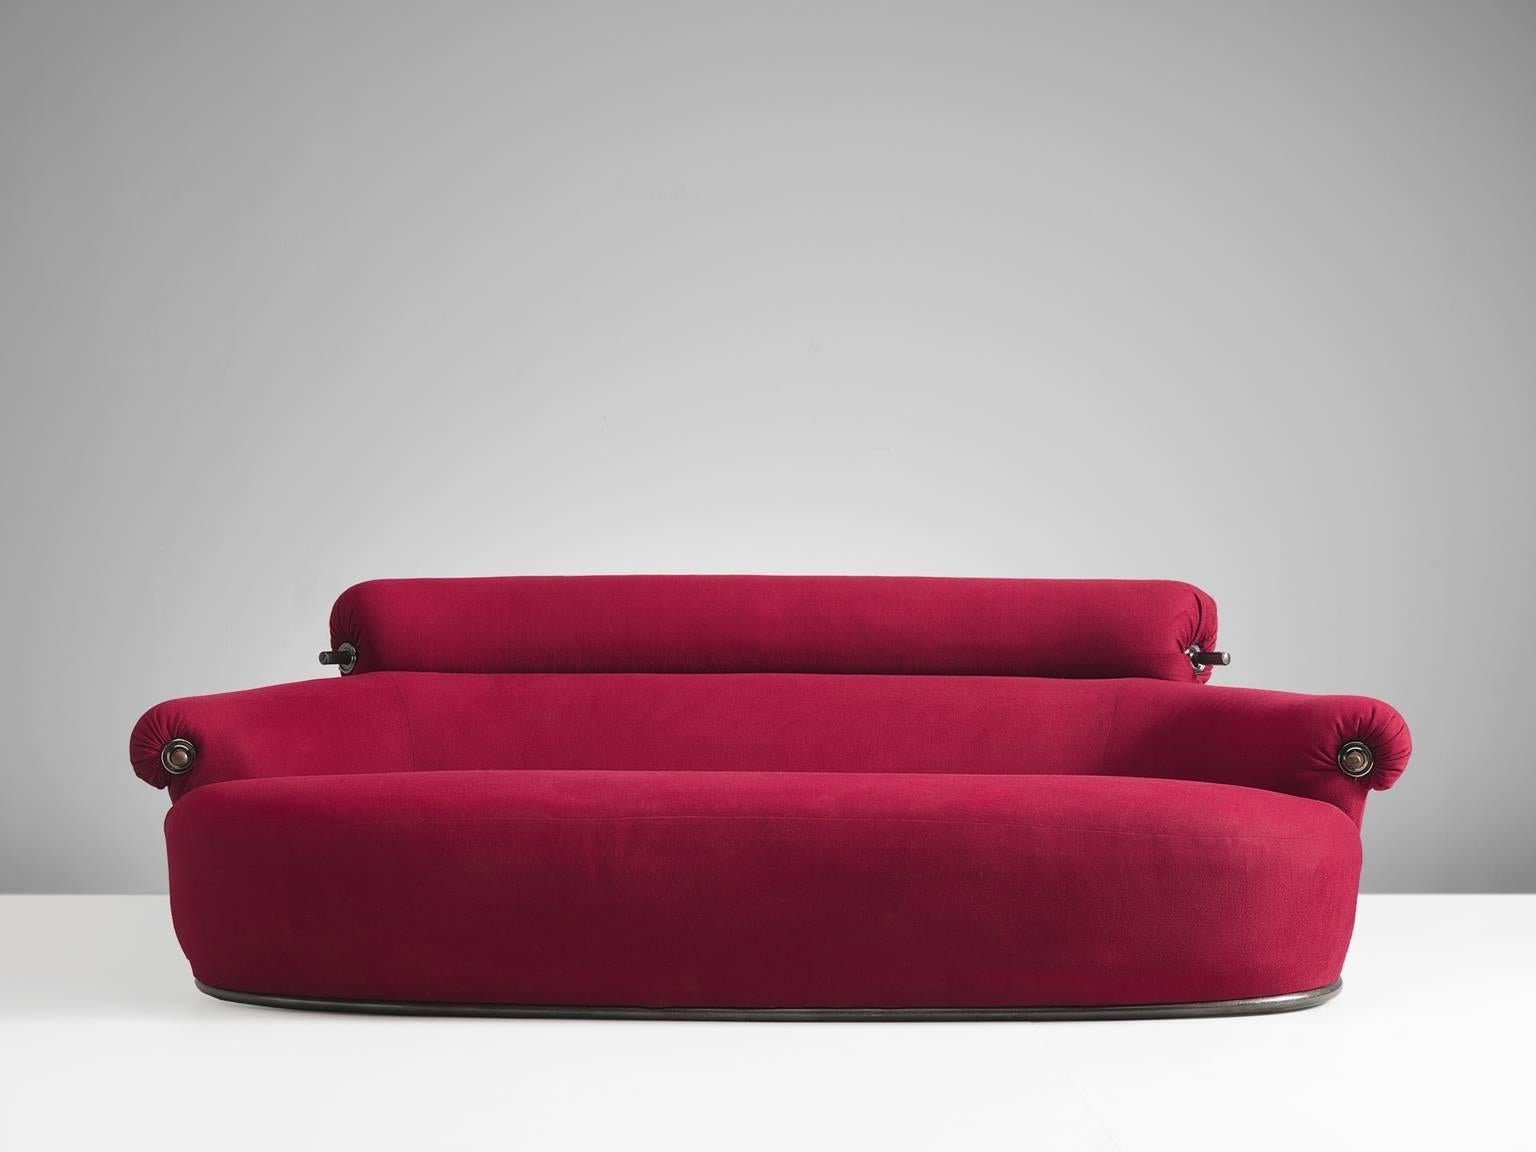 Luigi Caccia Dominioni for Azucena, toro sofa, red fabric, Italy, circa 1960

This sofa model 'P20B Toro' is produced by Azucena. The sofa is designed by Luigi Caccio Dominioni in Milan. The sofa is nicknamed Toro which is used because of several